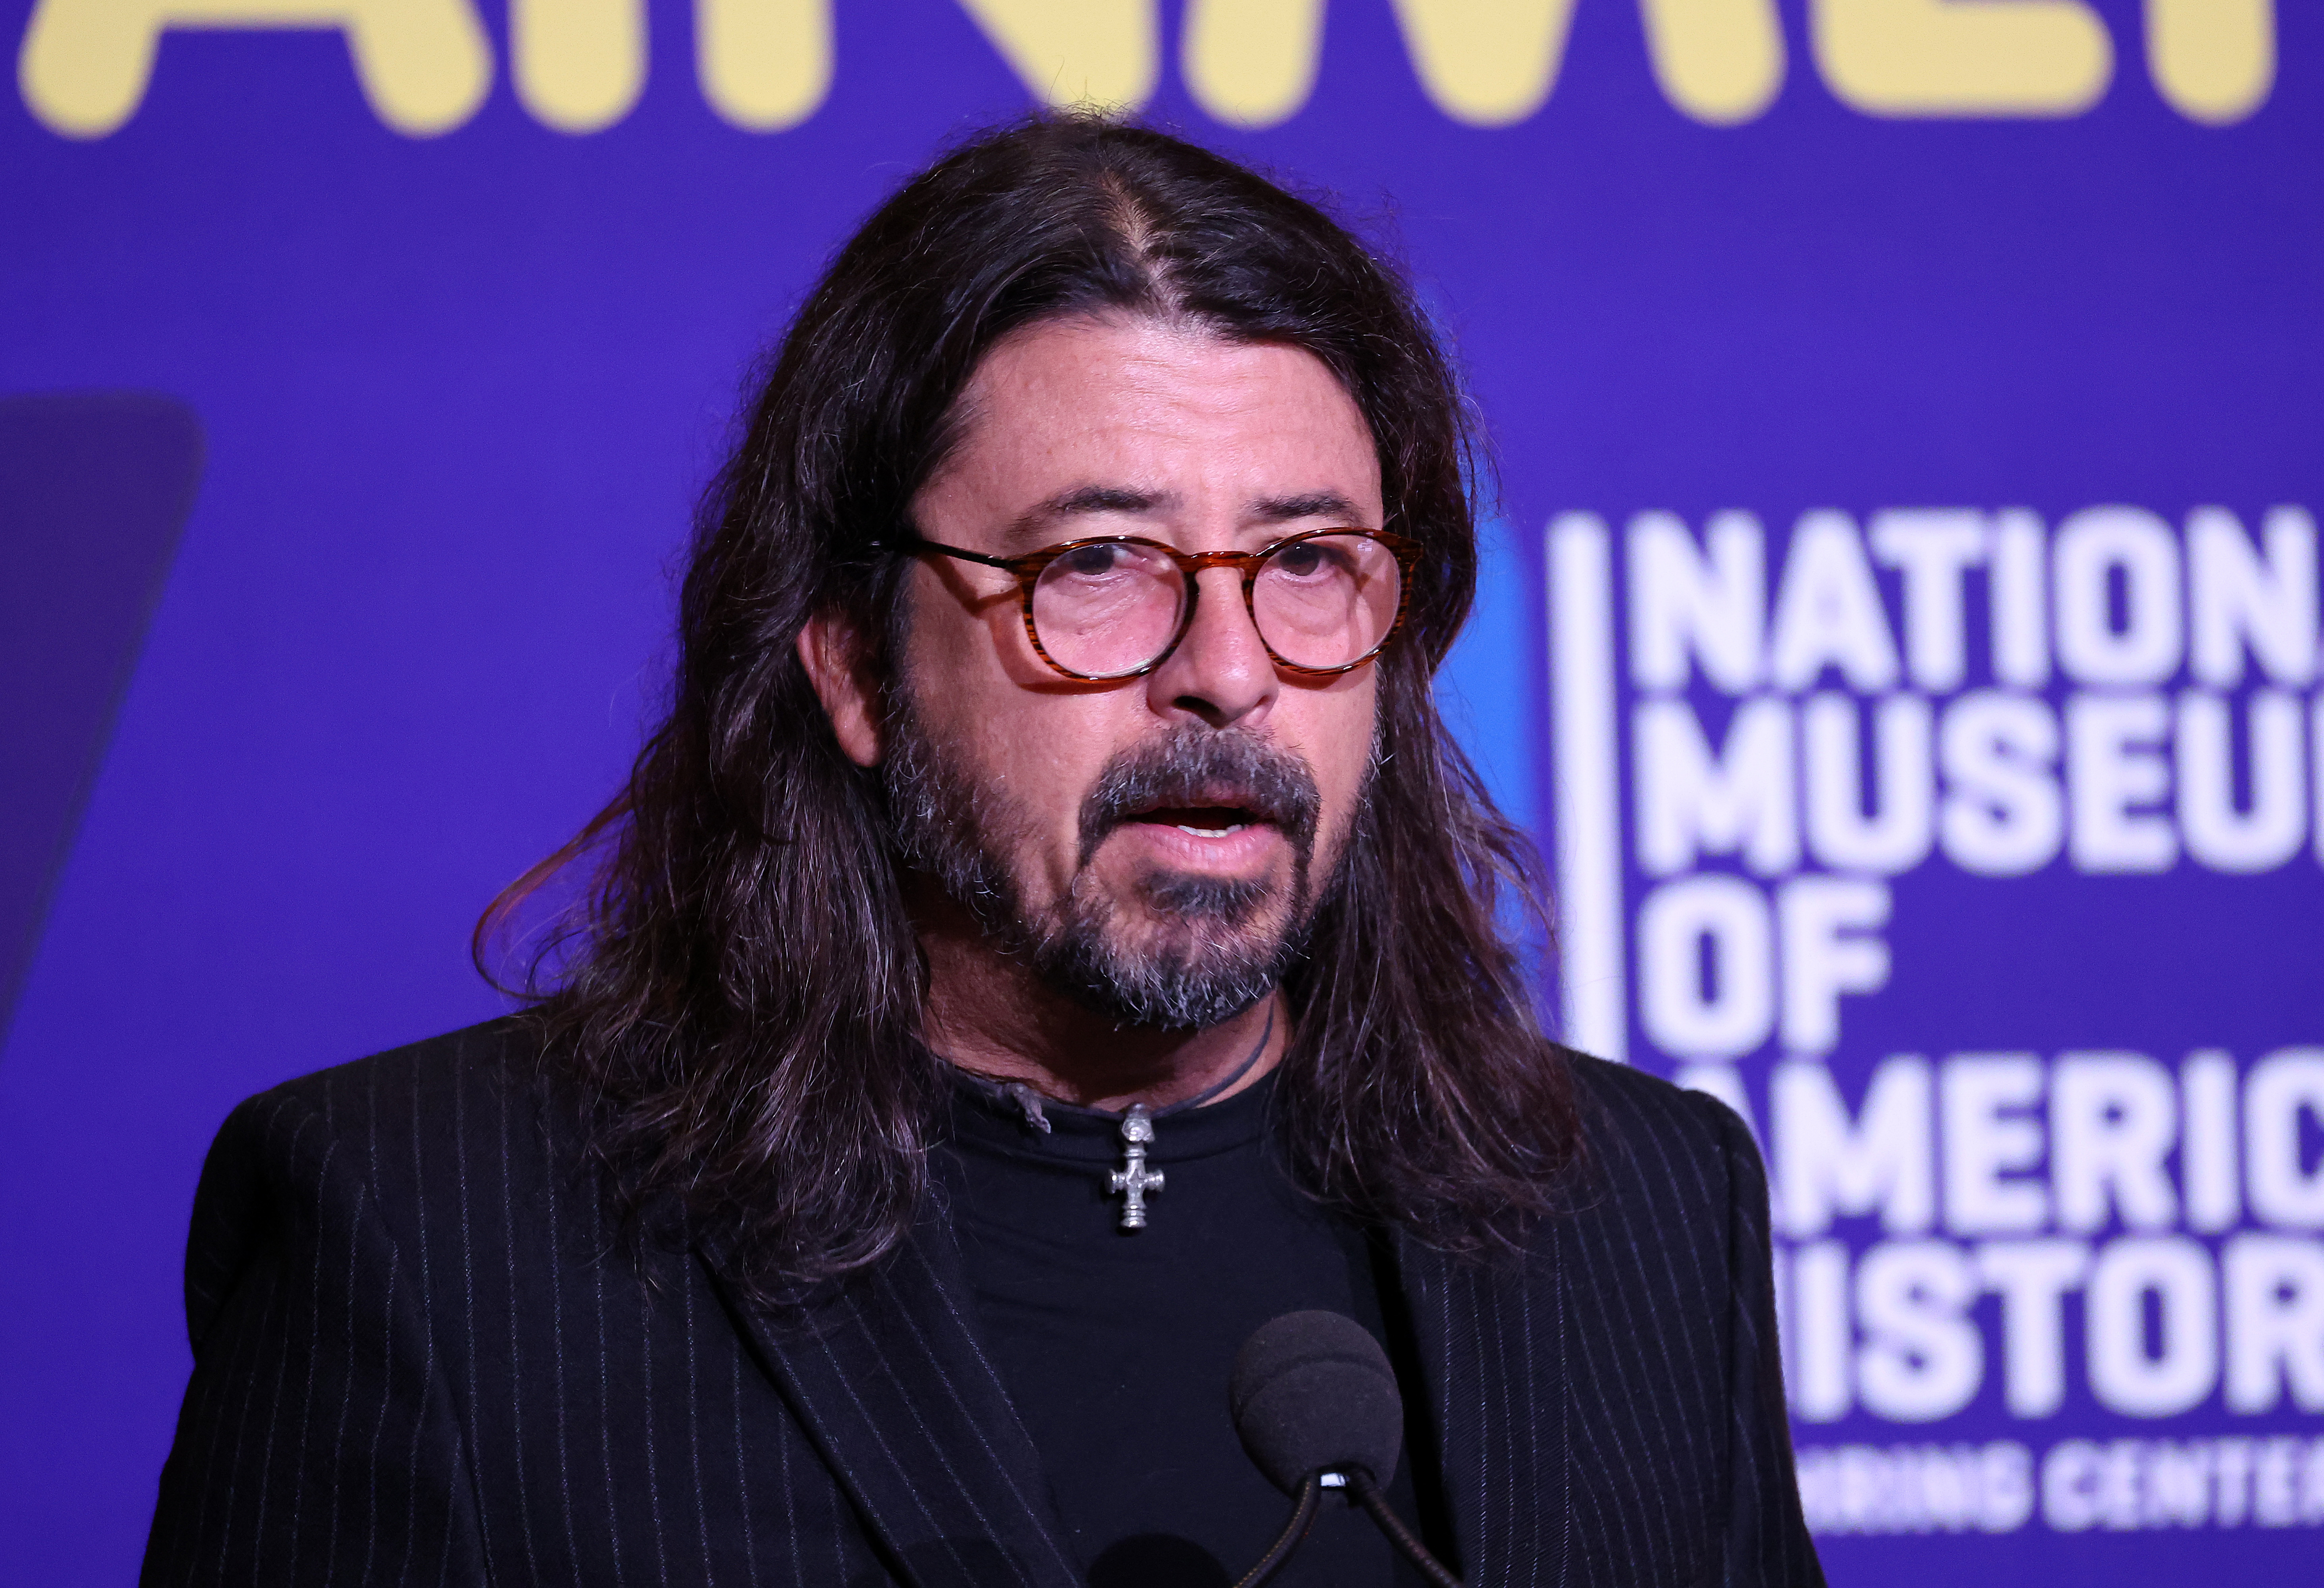 Dave Grohl speaks at an event in front of a sign for the National Museum of American History, wearing glasses and a black pinstriped suit jacket